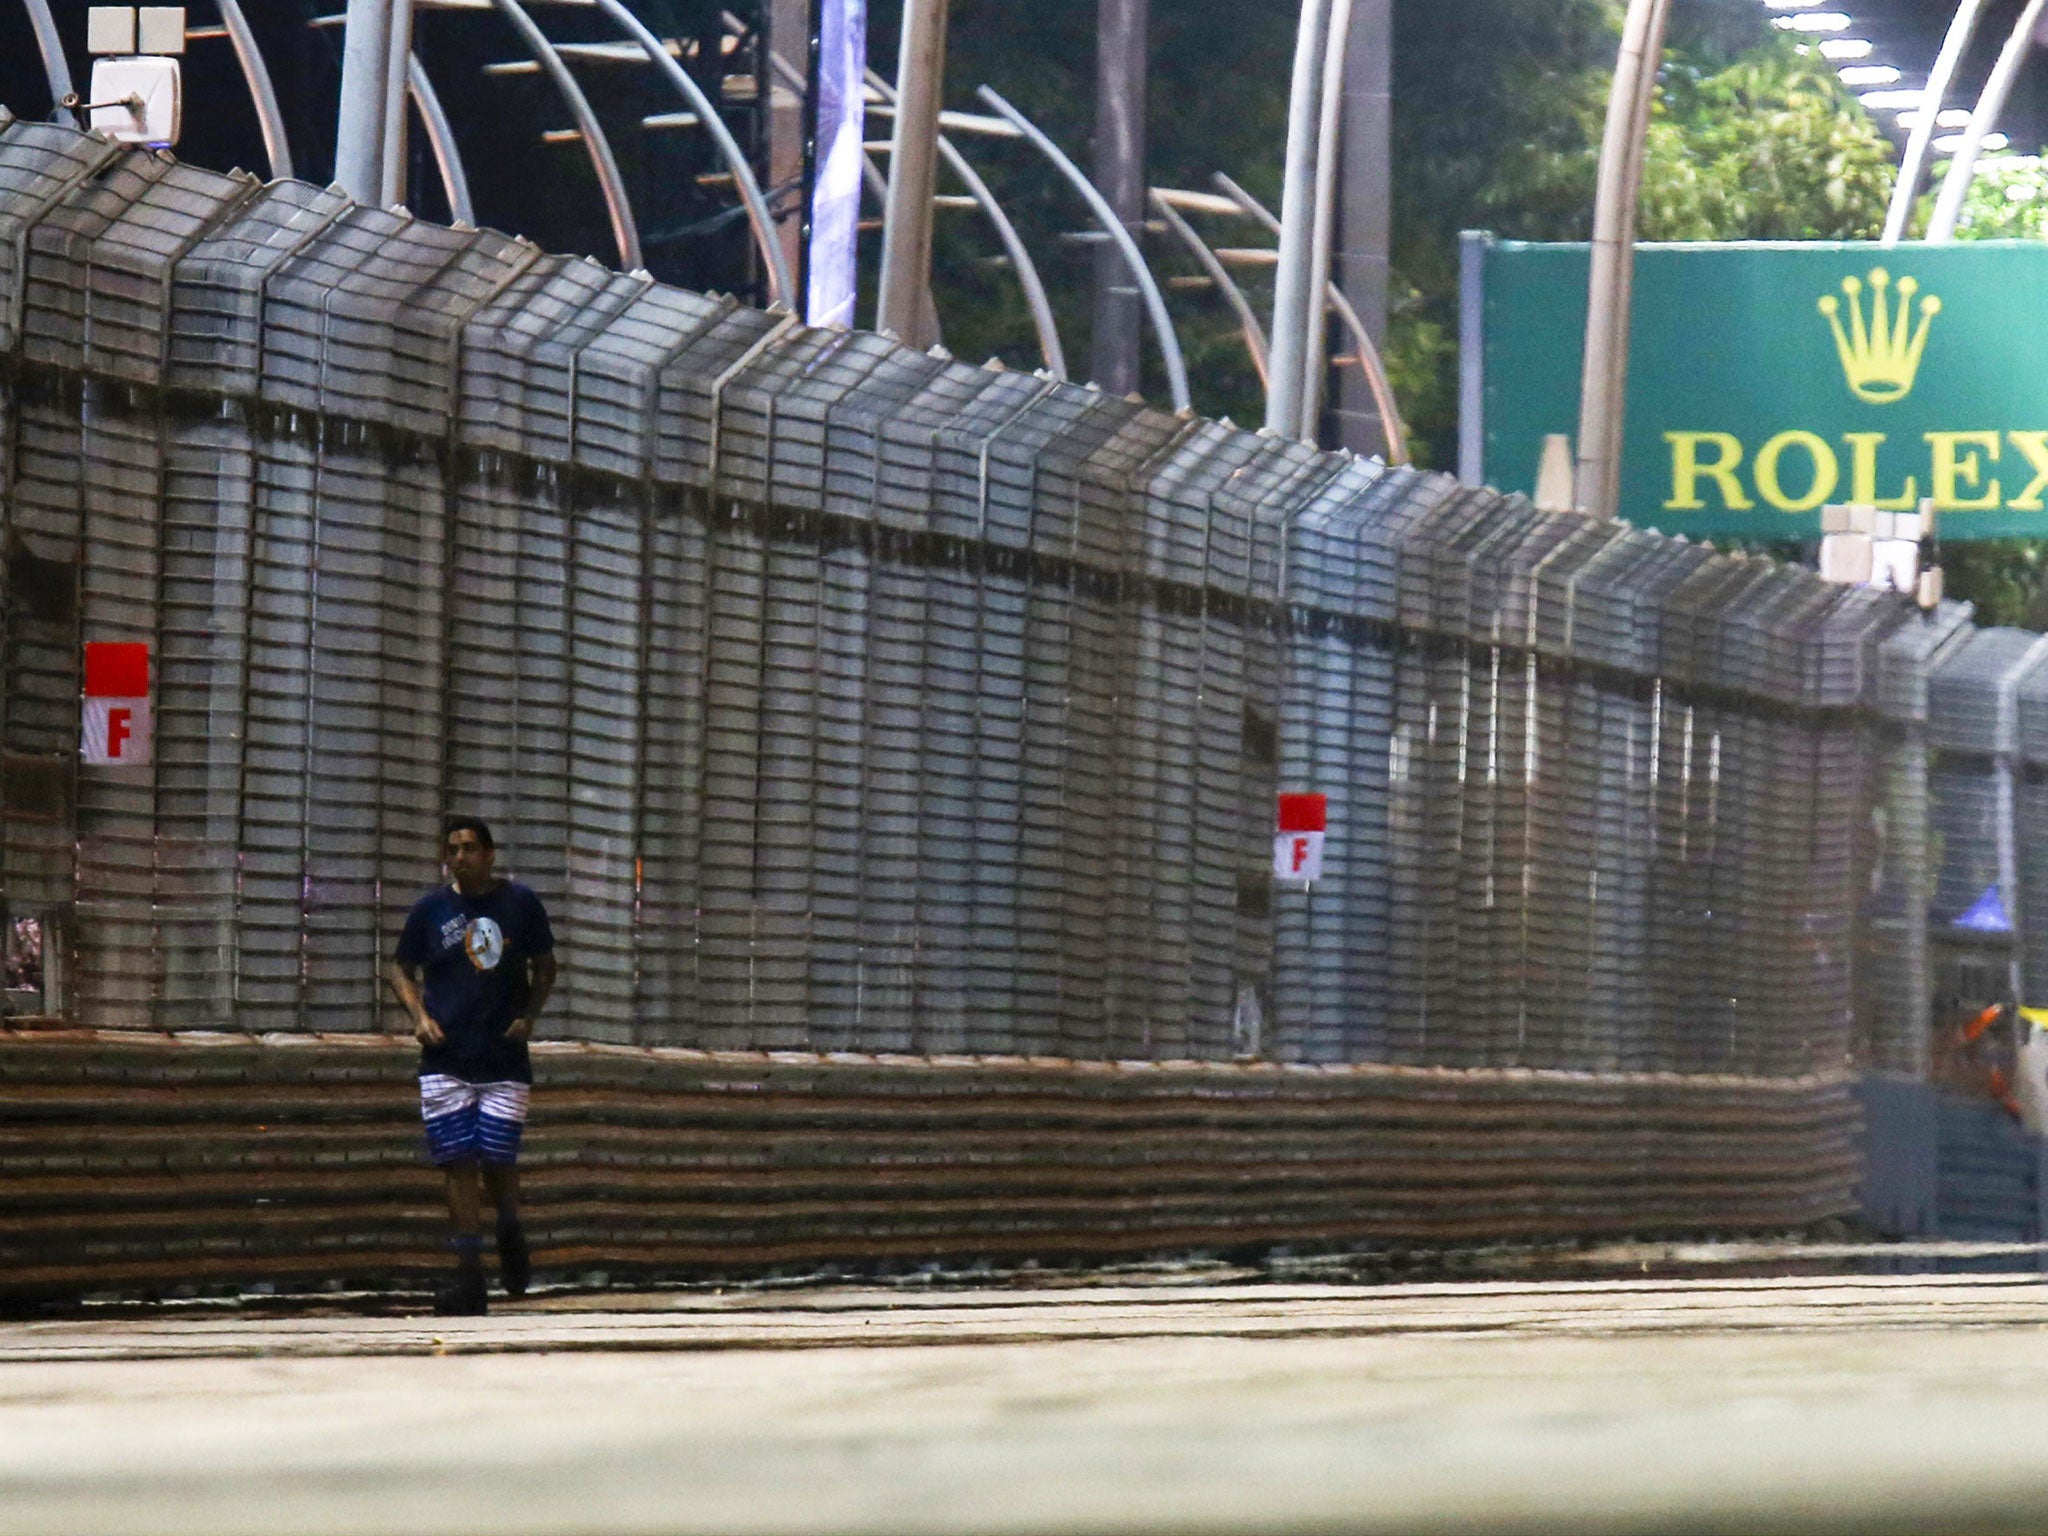 The safety car is deployed after a fan wanders on the track, Singapore Formula One 1 Grand Prix, Marina Bay Circuit, Singapore - 20 Sep 2015